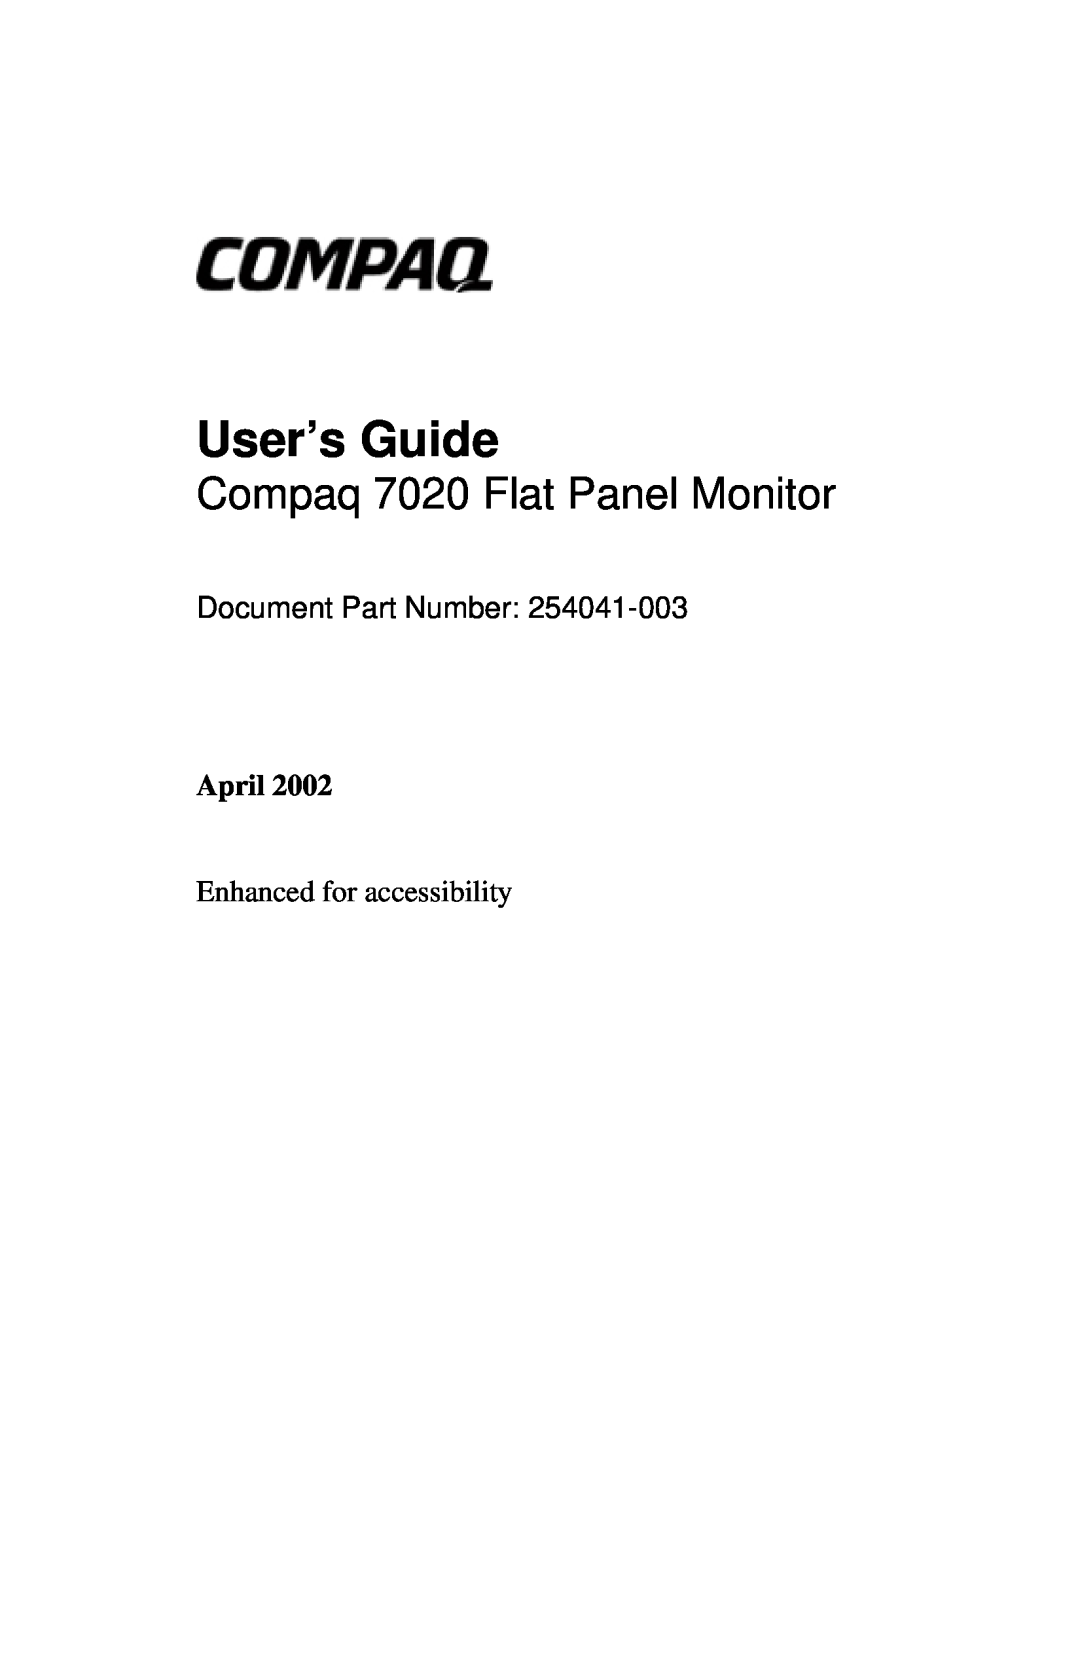 Compaq manual April, User’s Guide, Compaq 7020 Flat Panel Monitor, Document Part Number 